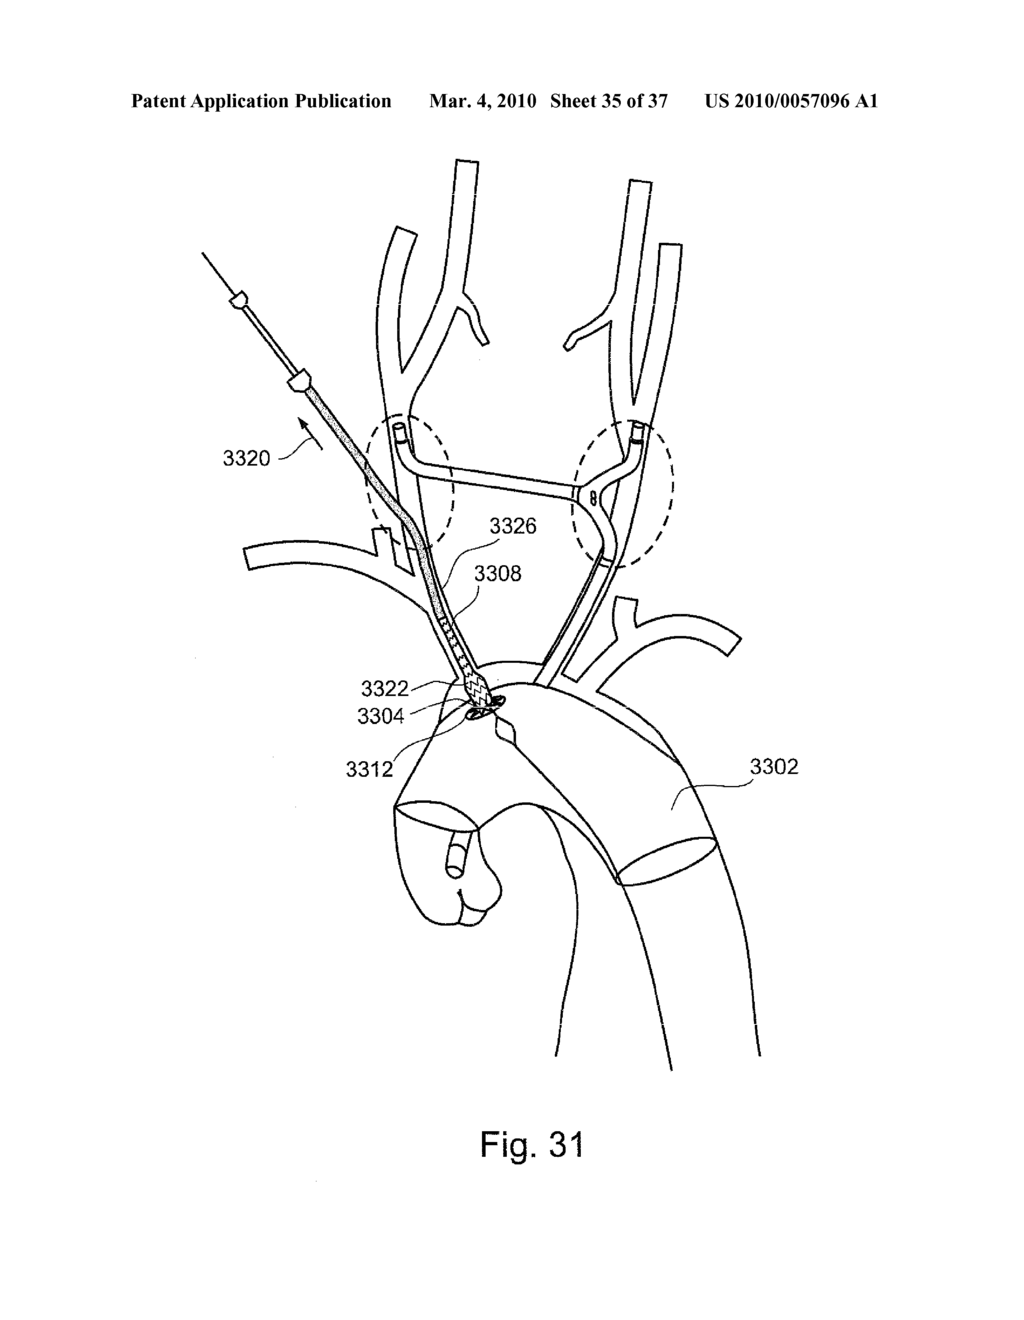 BRANCH STENT GRAFT FOR AORTIC ANEURYSM REPAIR - diagram, schematic, and image 36